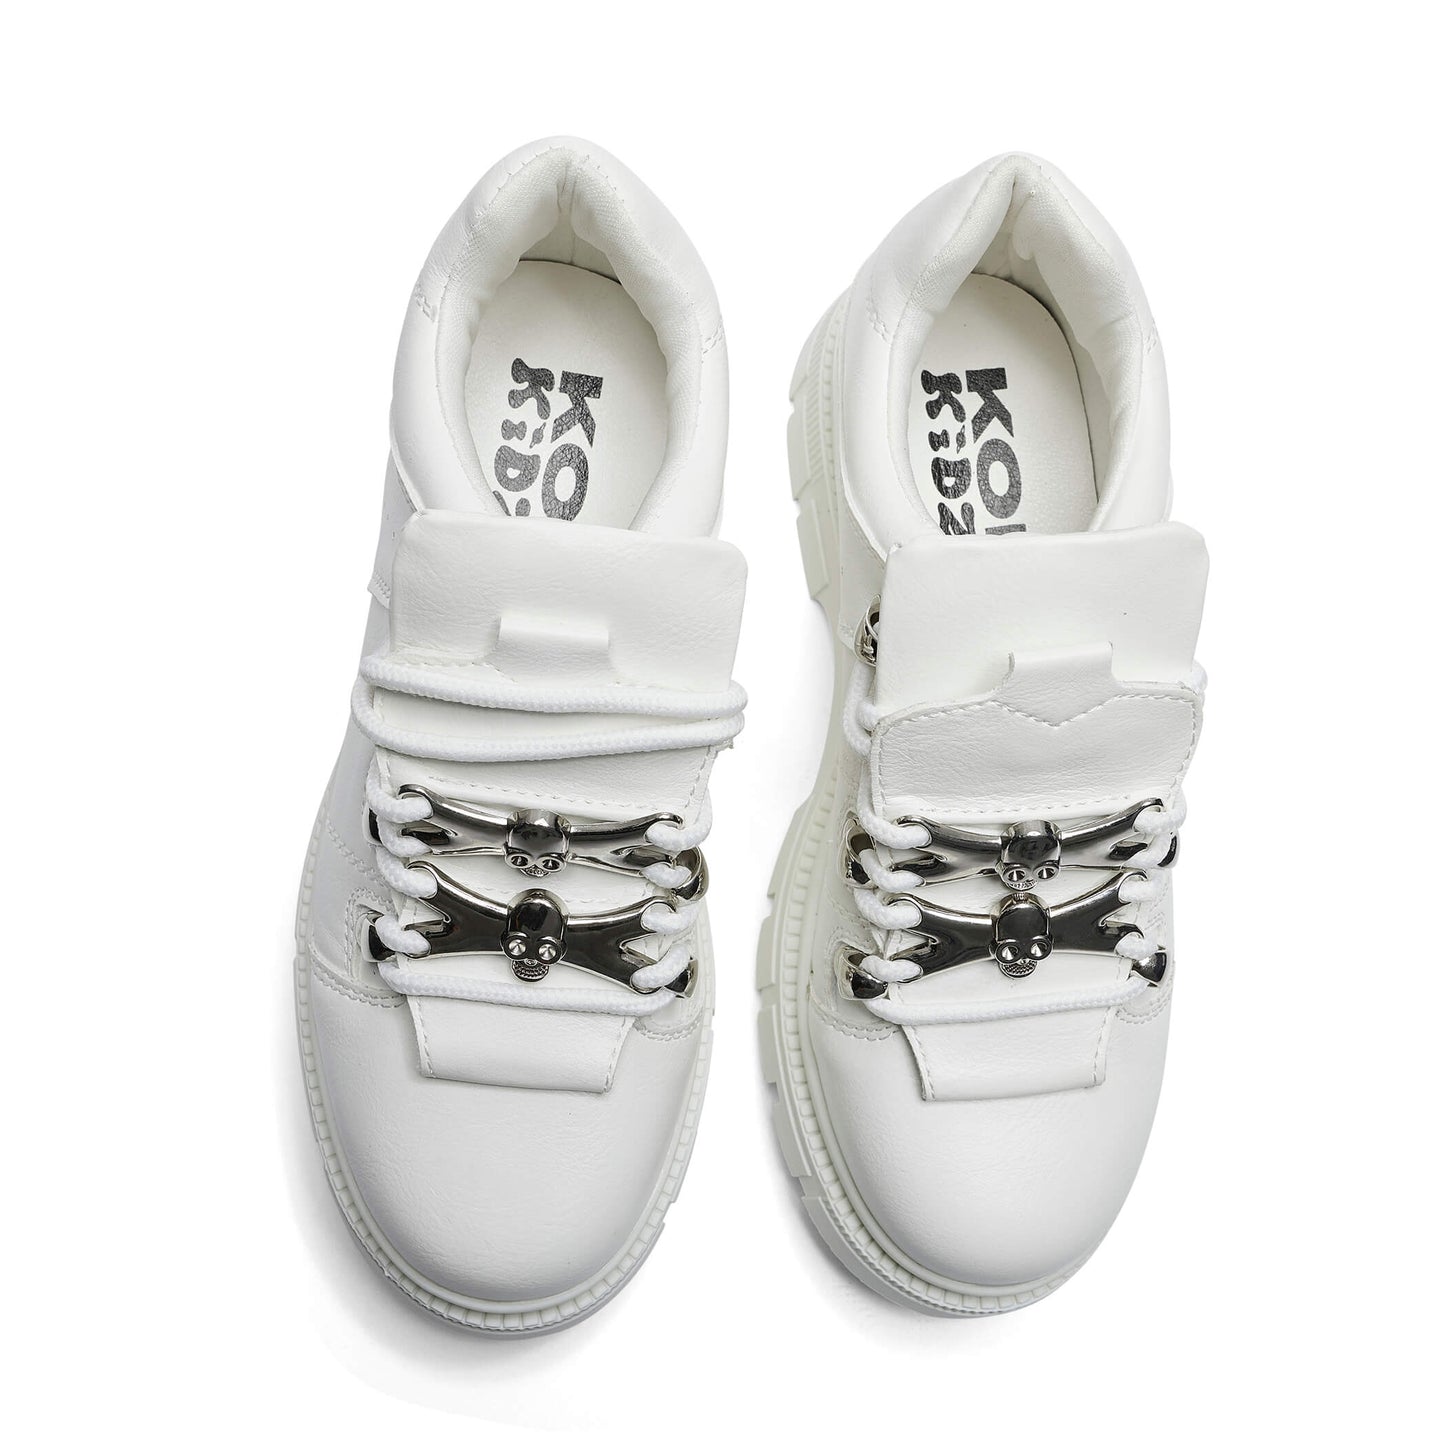 Lil’ Rimo Core White Trainers - Trainers - KOI Footwear - White - Top View